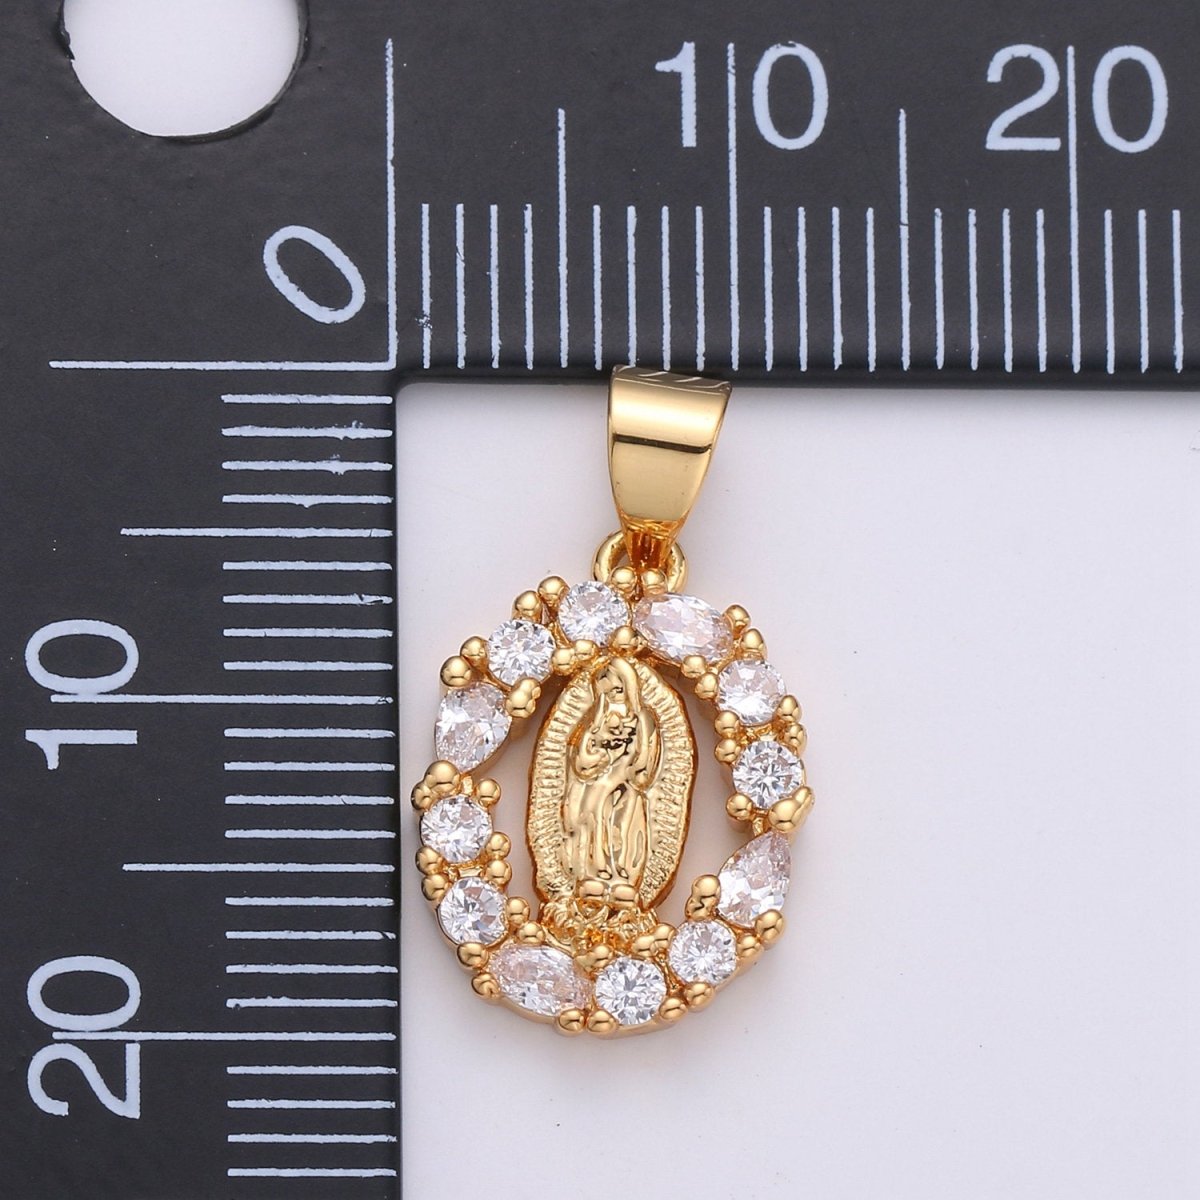 Dainty 24k Gold Filled Virgin Mary Pendant Necklace Micro Pave Lady Guadalupe Medallion Pendant for Necklace Religious Jewelry Supply I-629 - DLUXCA